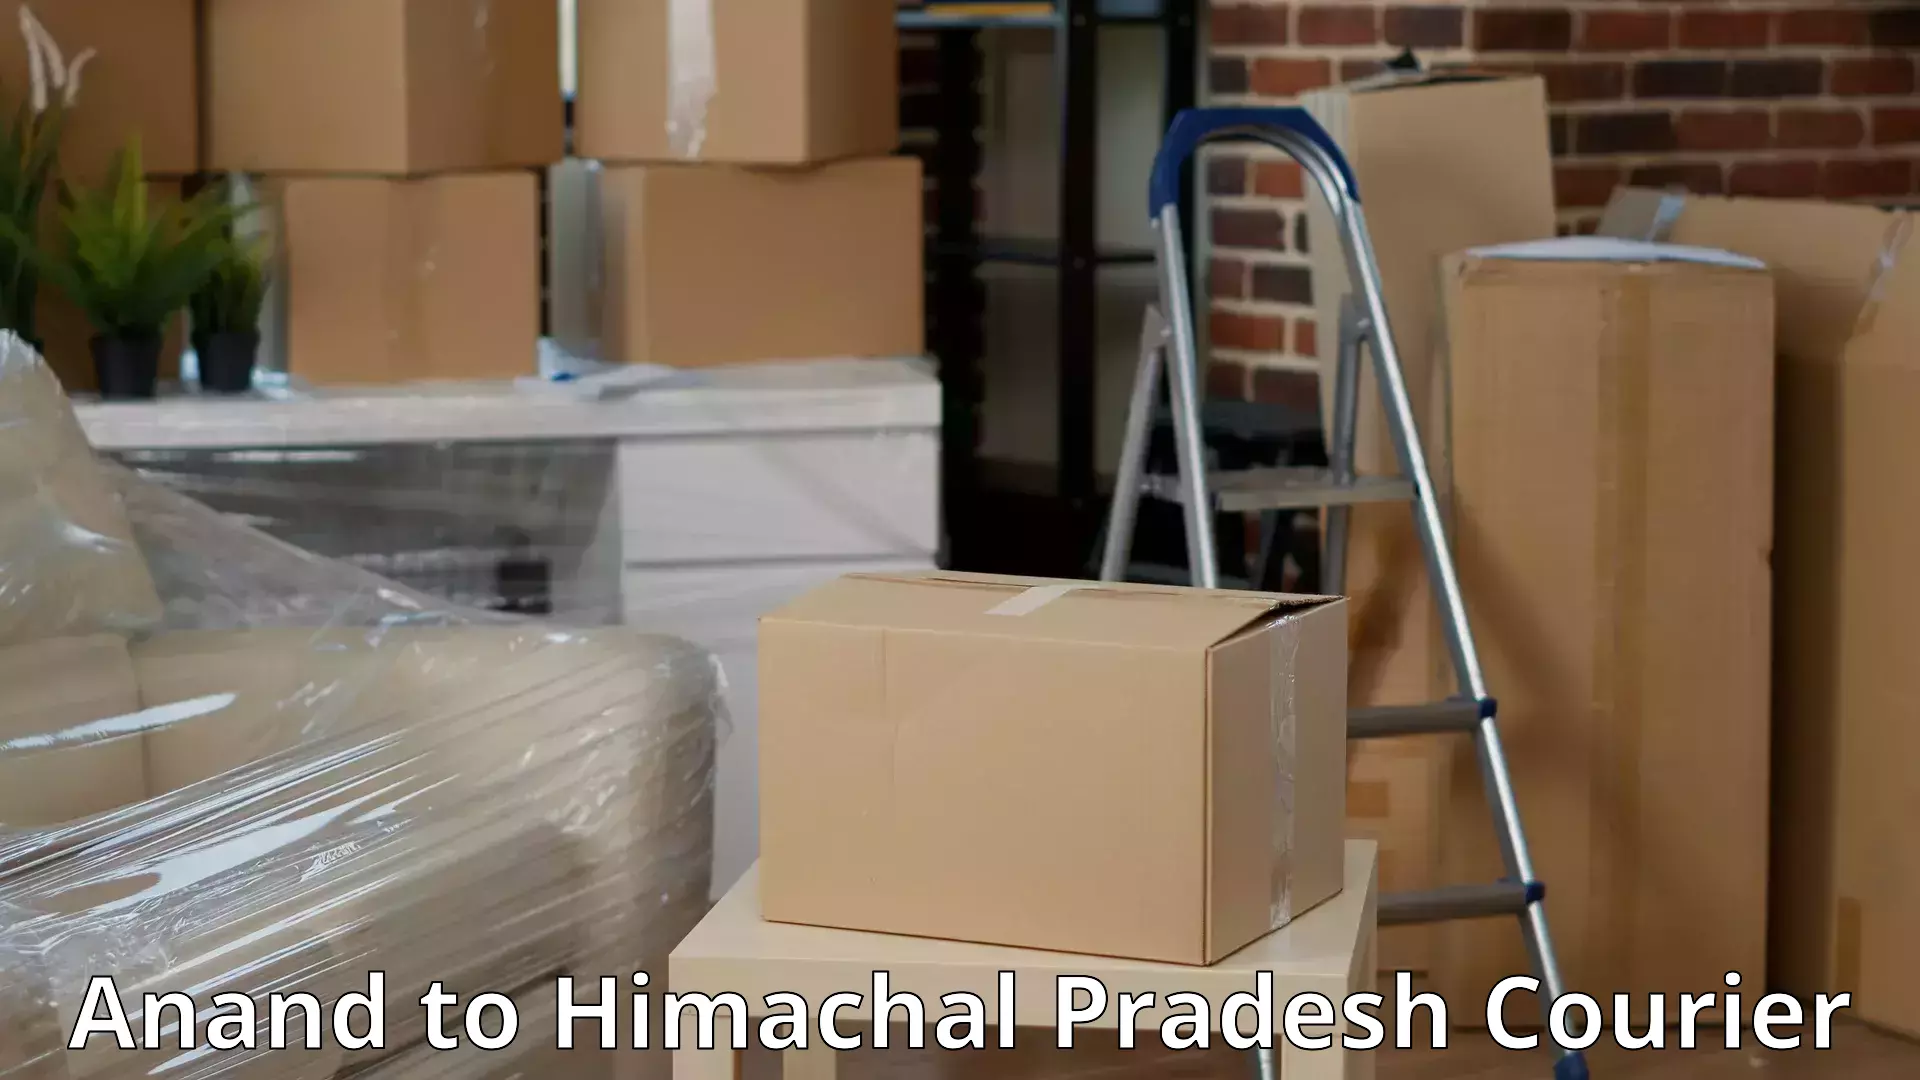 Furniture relocation experts Anand to Himachal Pradesh